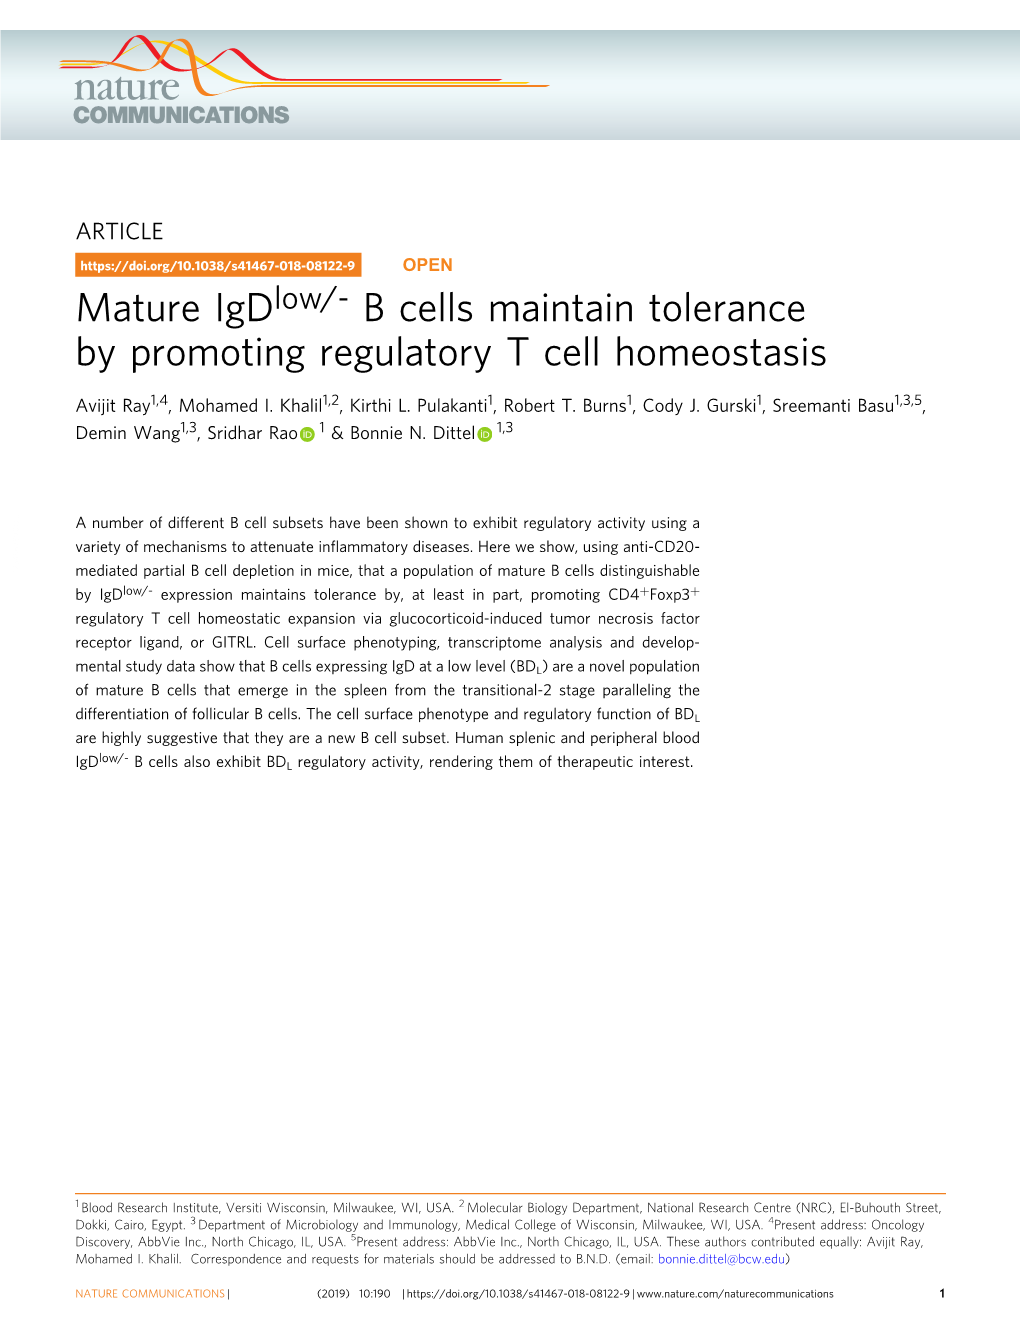 B Cells Maintain Tolerance by Promoting Regulatory T Cell Homeostasis